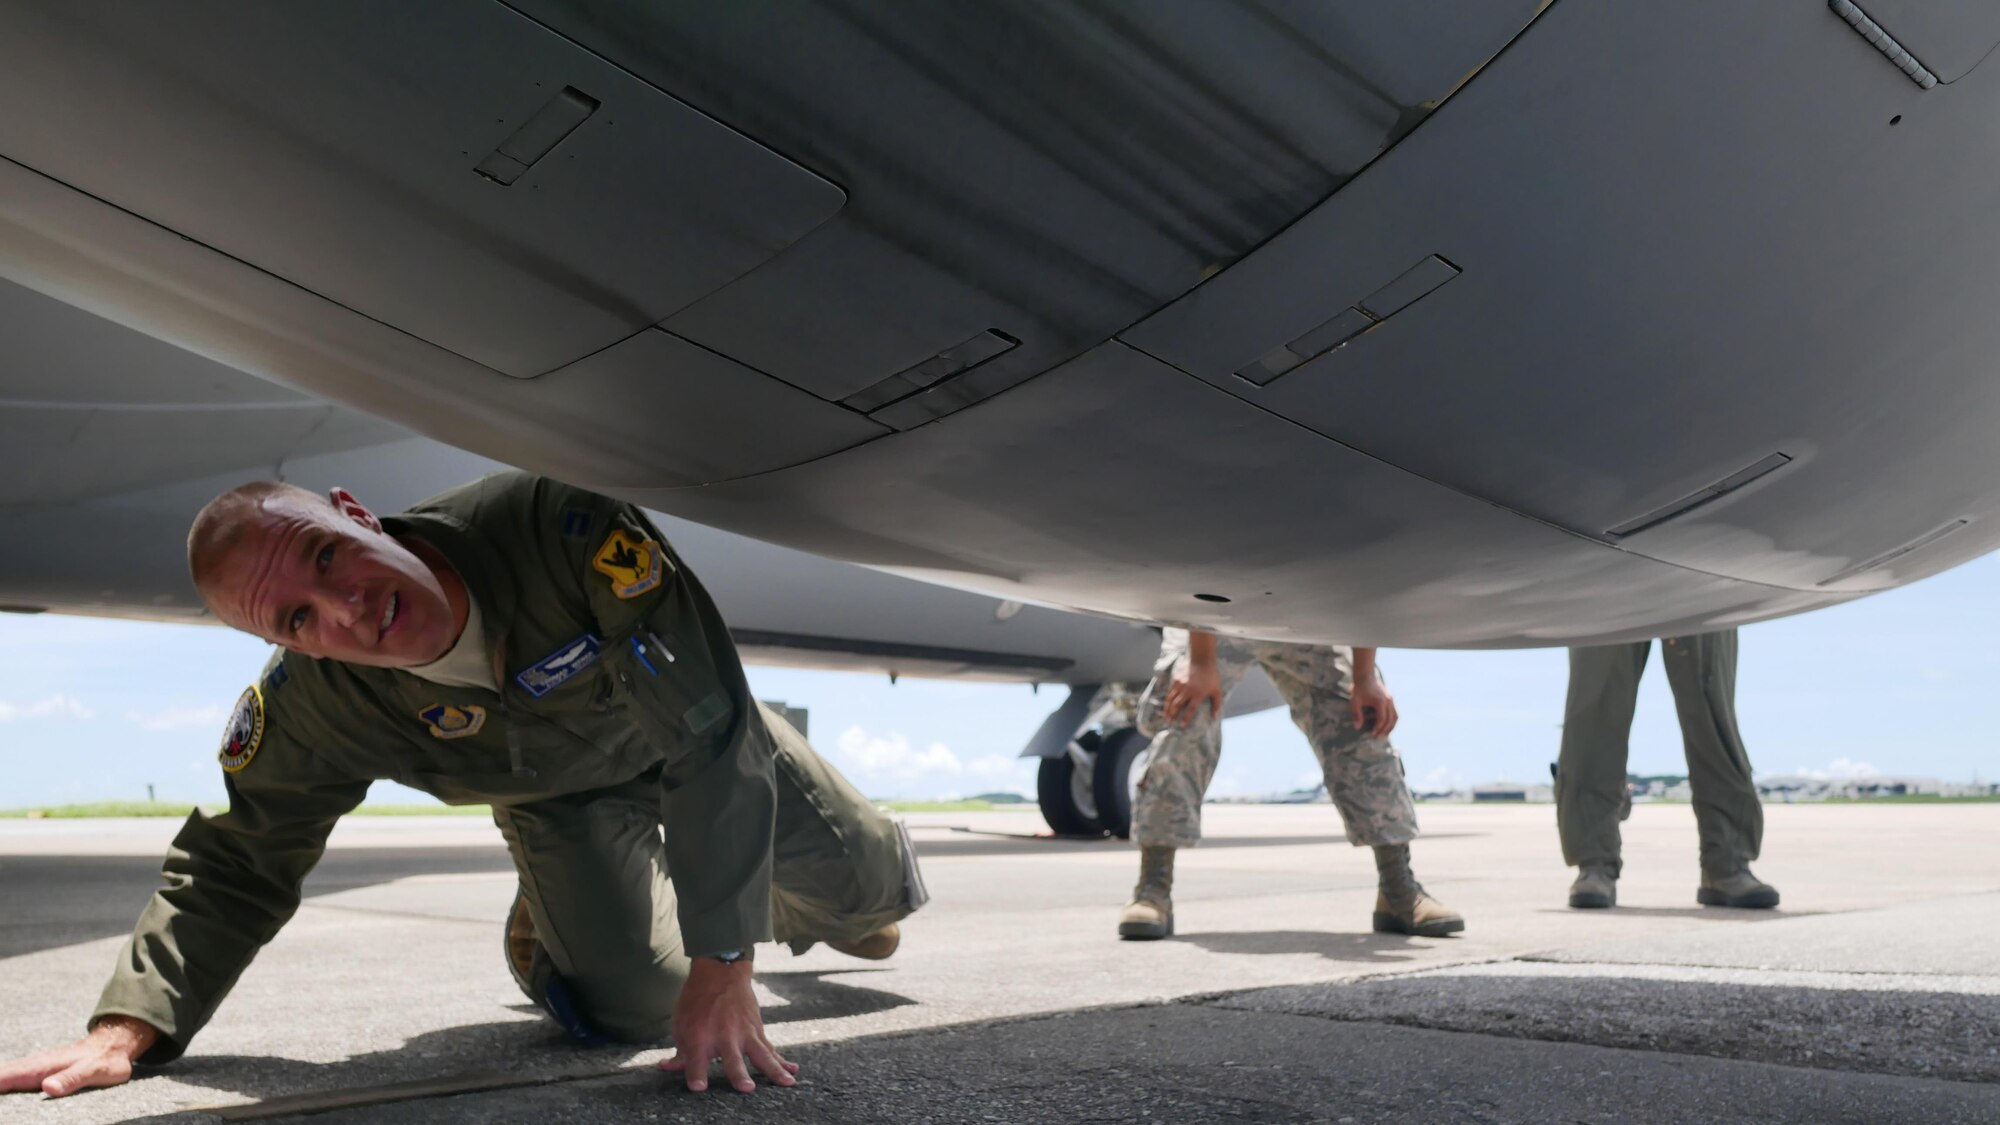 U.S. Air Force Capt. Thomas Weber, 909th Air Refueling Squadron pilot, conducts a pre-flight inspection of a KC-135R Stratotanker June 30, 2016 at Kadena Air Base, Japan. The Stratotanker has been the Air Force’s core aerial refueling airframe for more than 50 years. (U.S. Air Force photo by Senior Airman John Linzmeier)